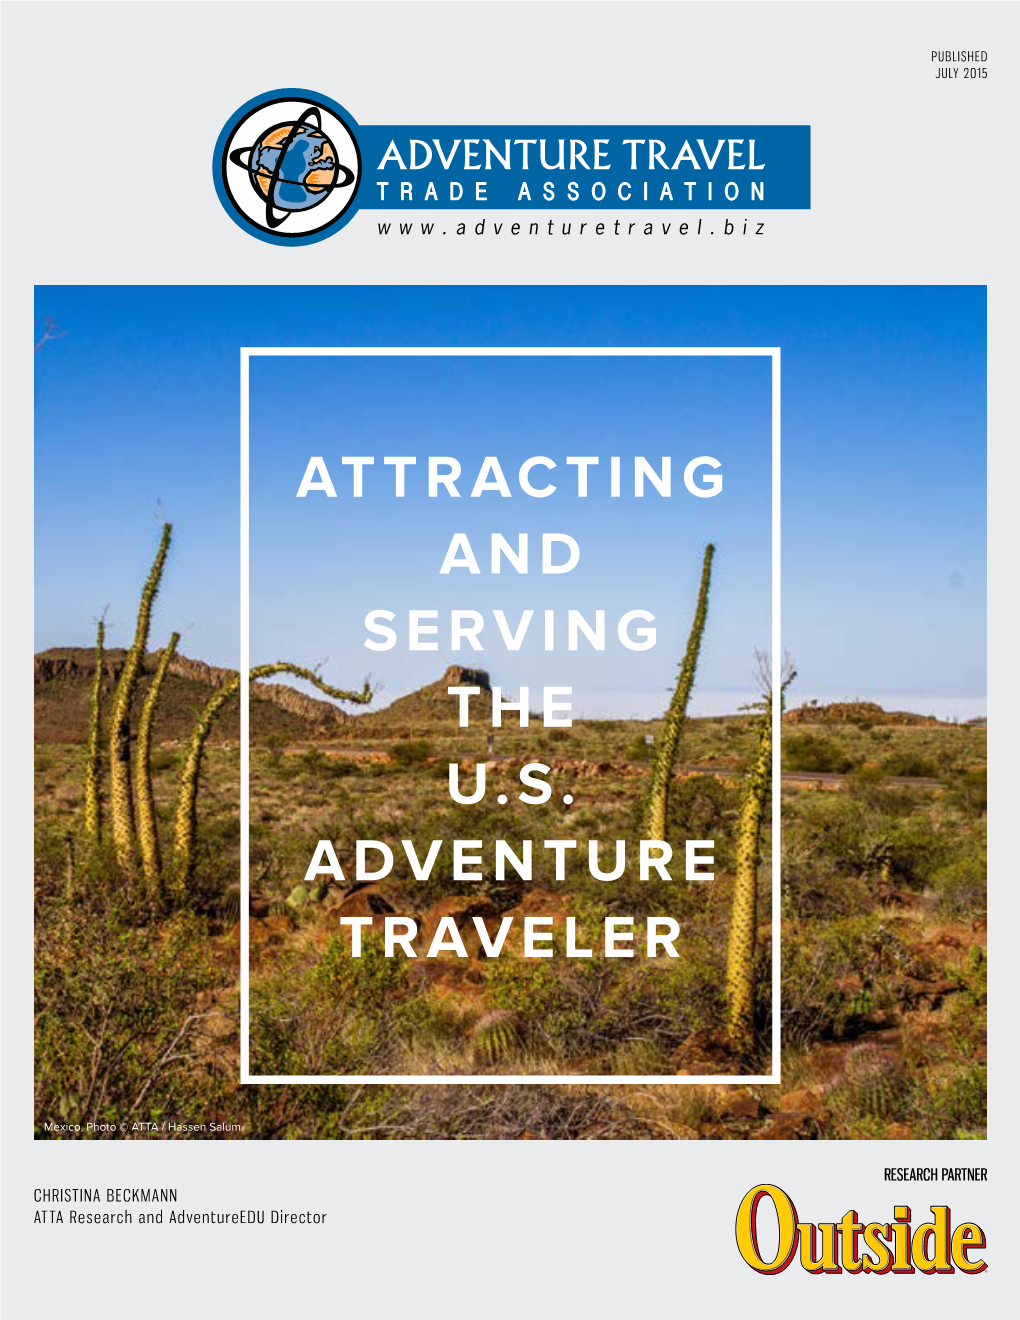 Attracting and Serving the U.S. Adventure Traveler